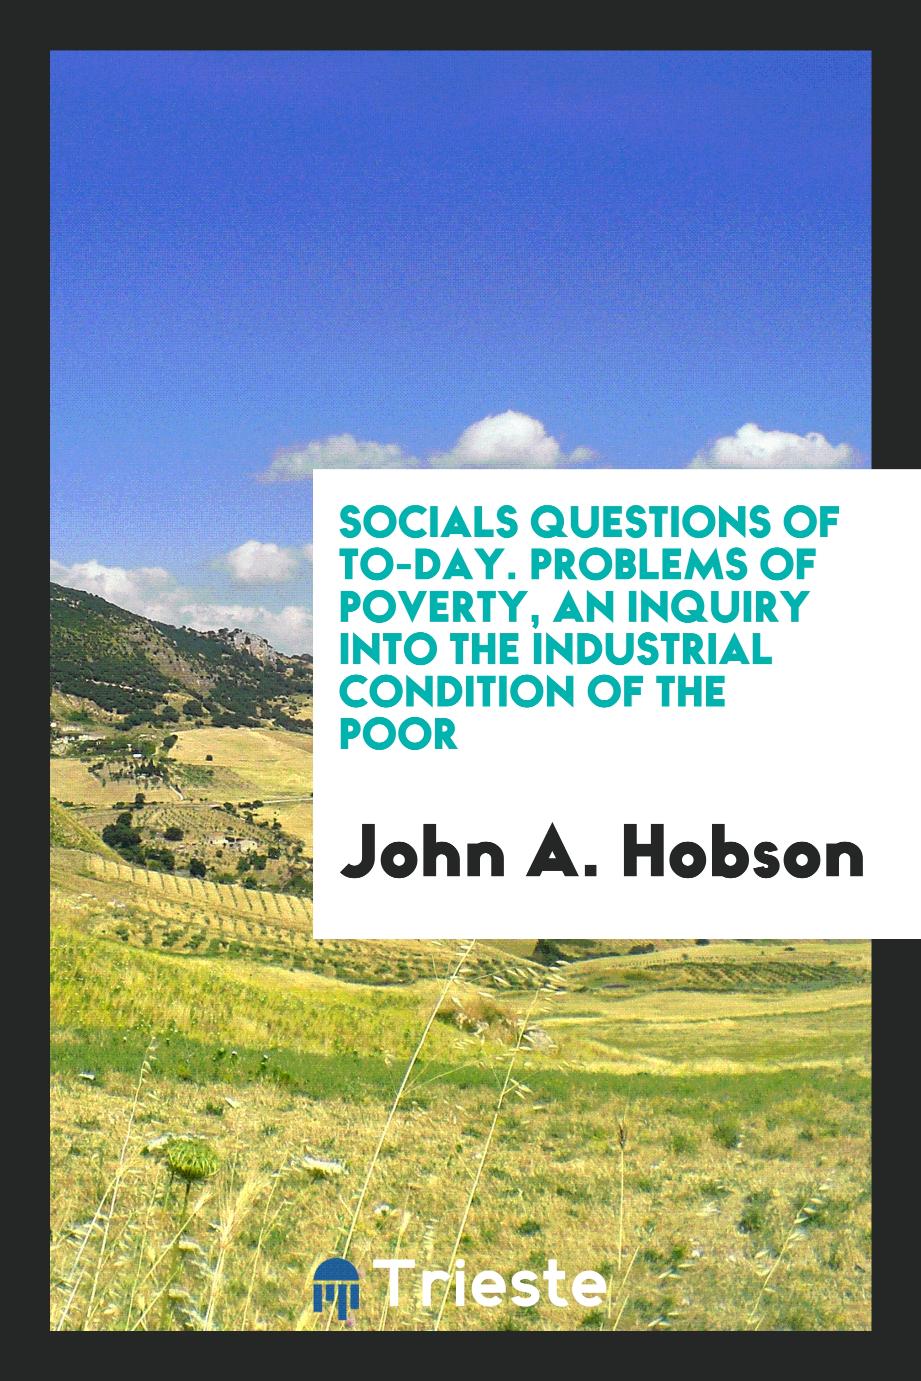 Socials questions of to-day. Problems of poverty, an inquiry into the industrial condition of the poor